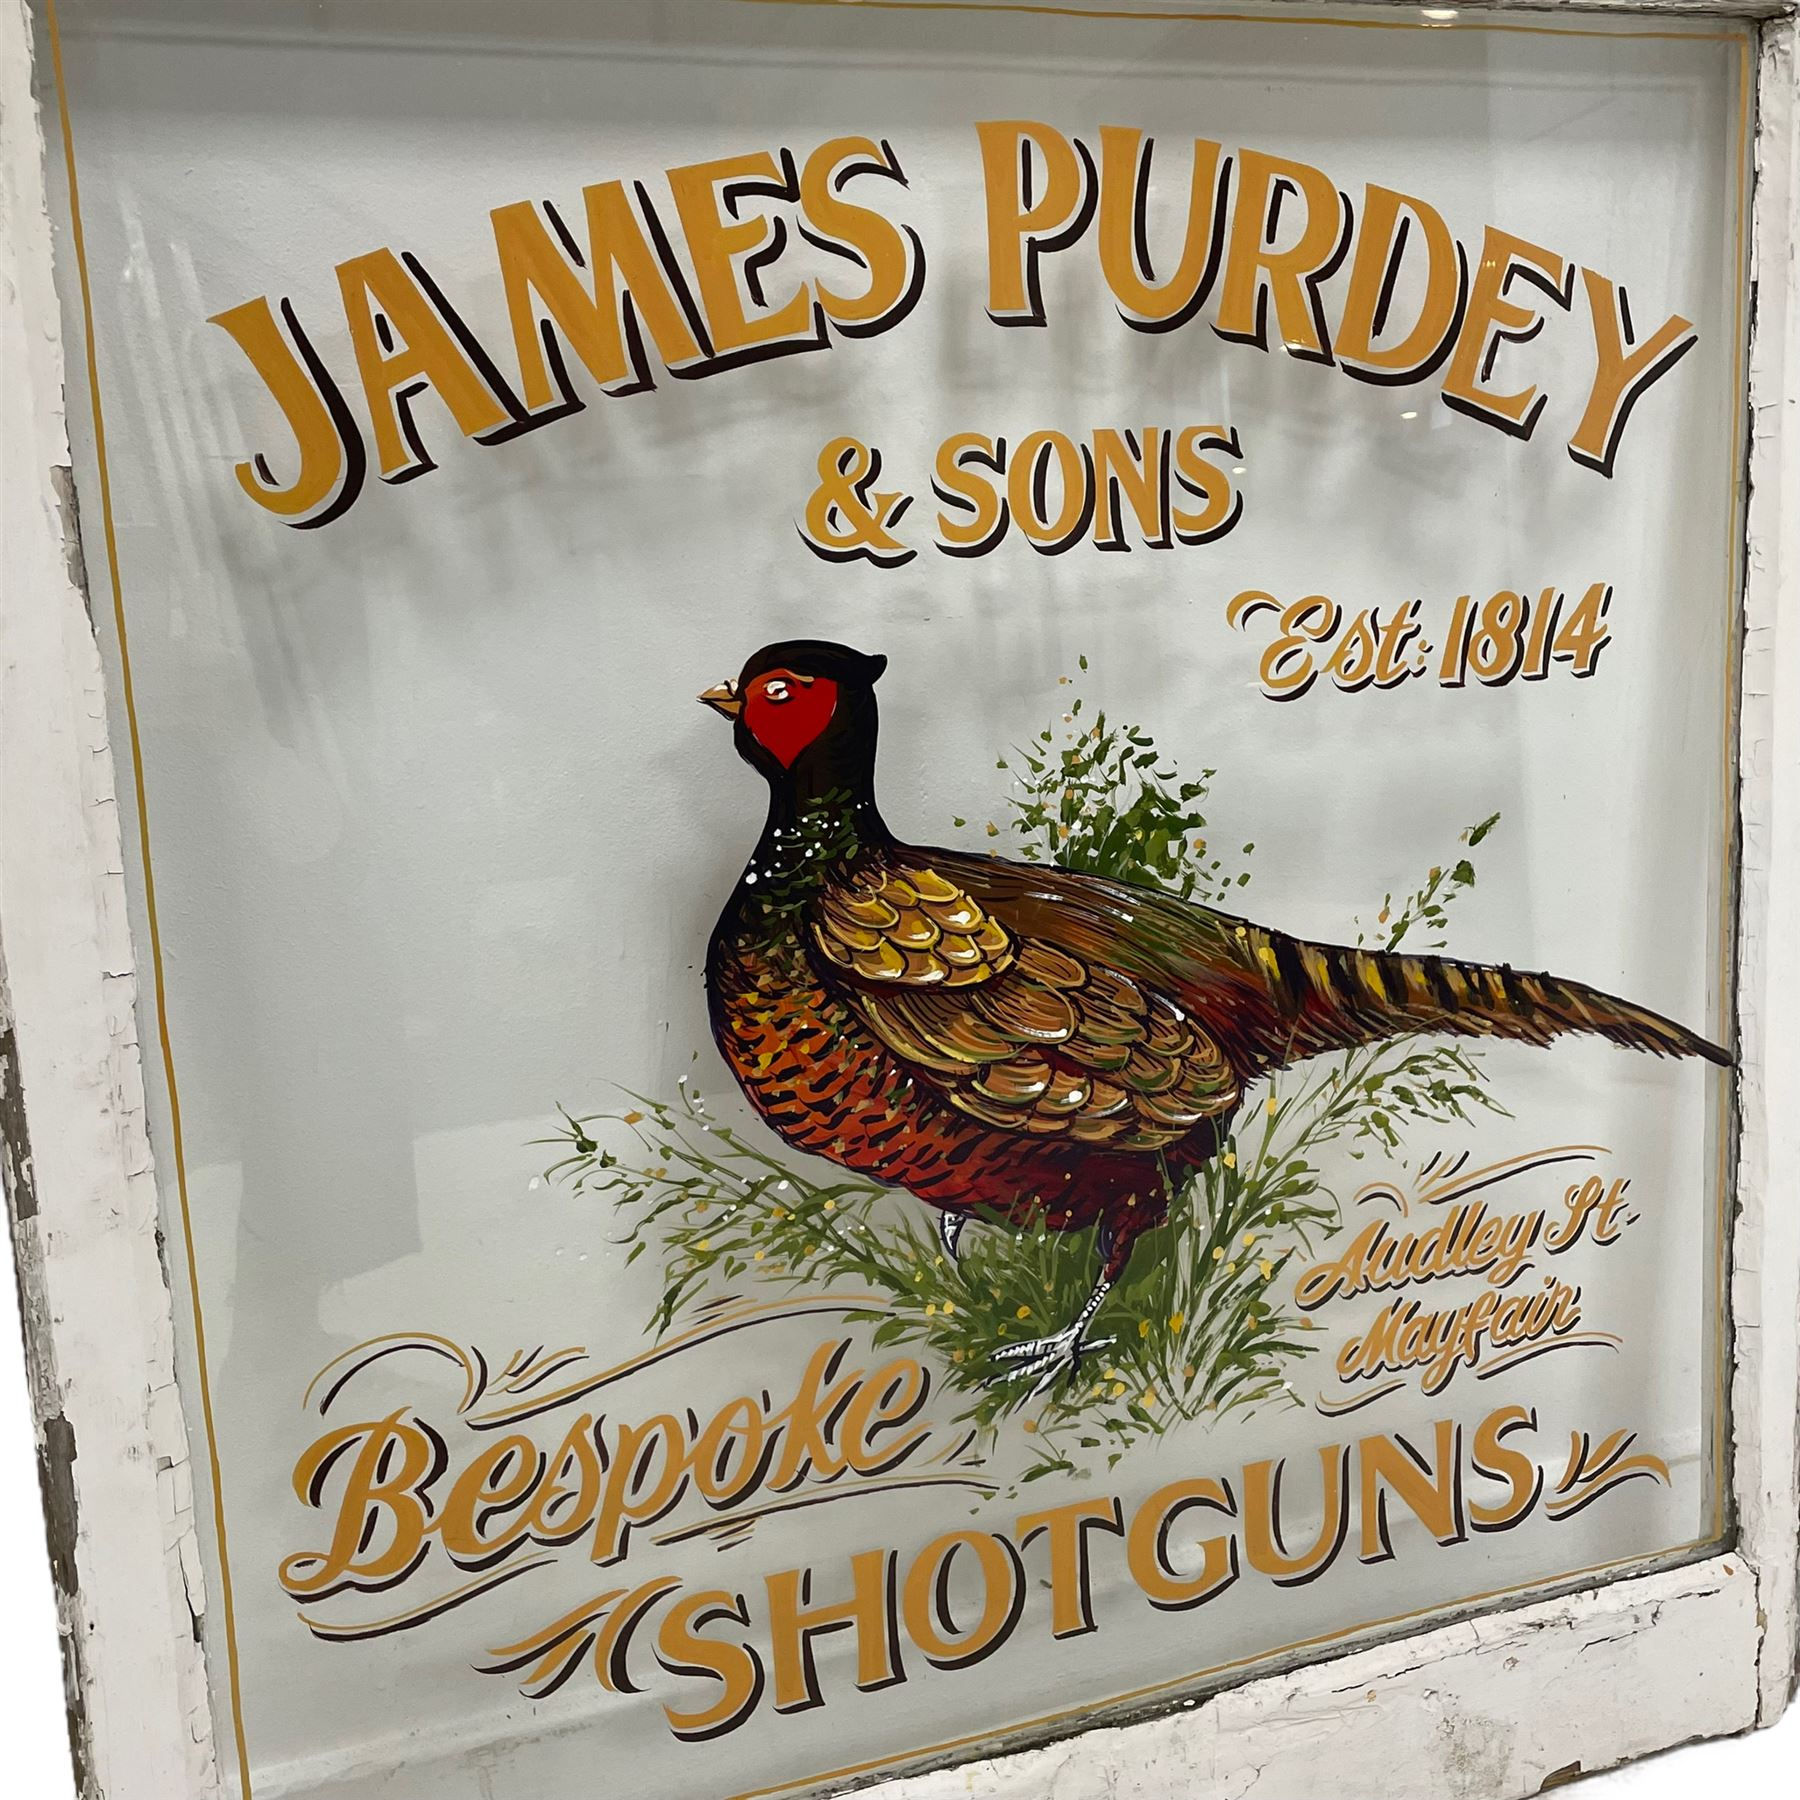 White painted window with hand painted advertising "Purdey and Sons - Image 5 of 5